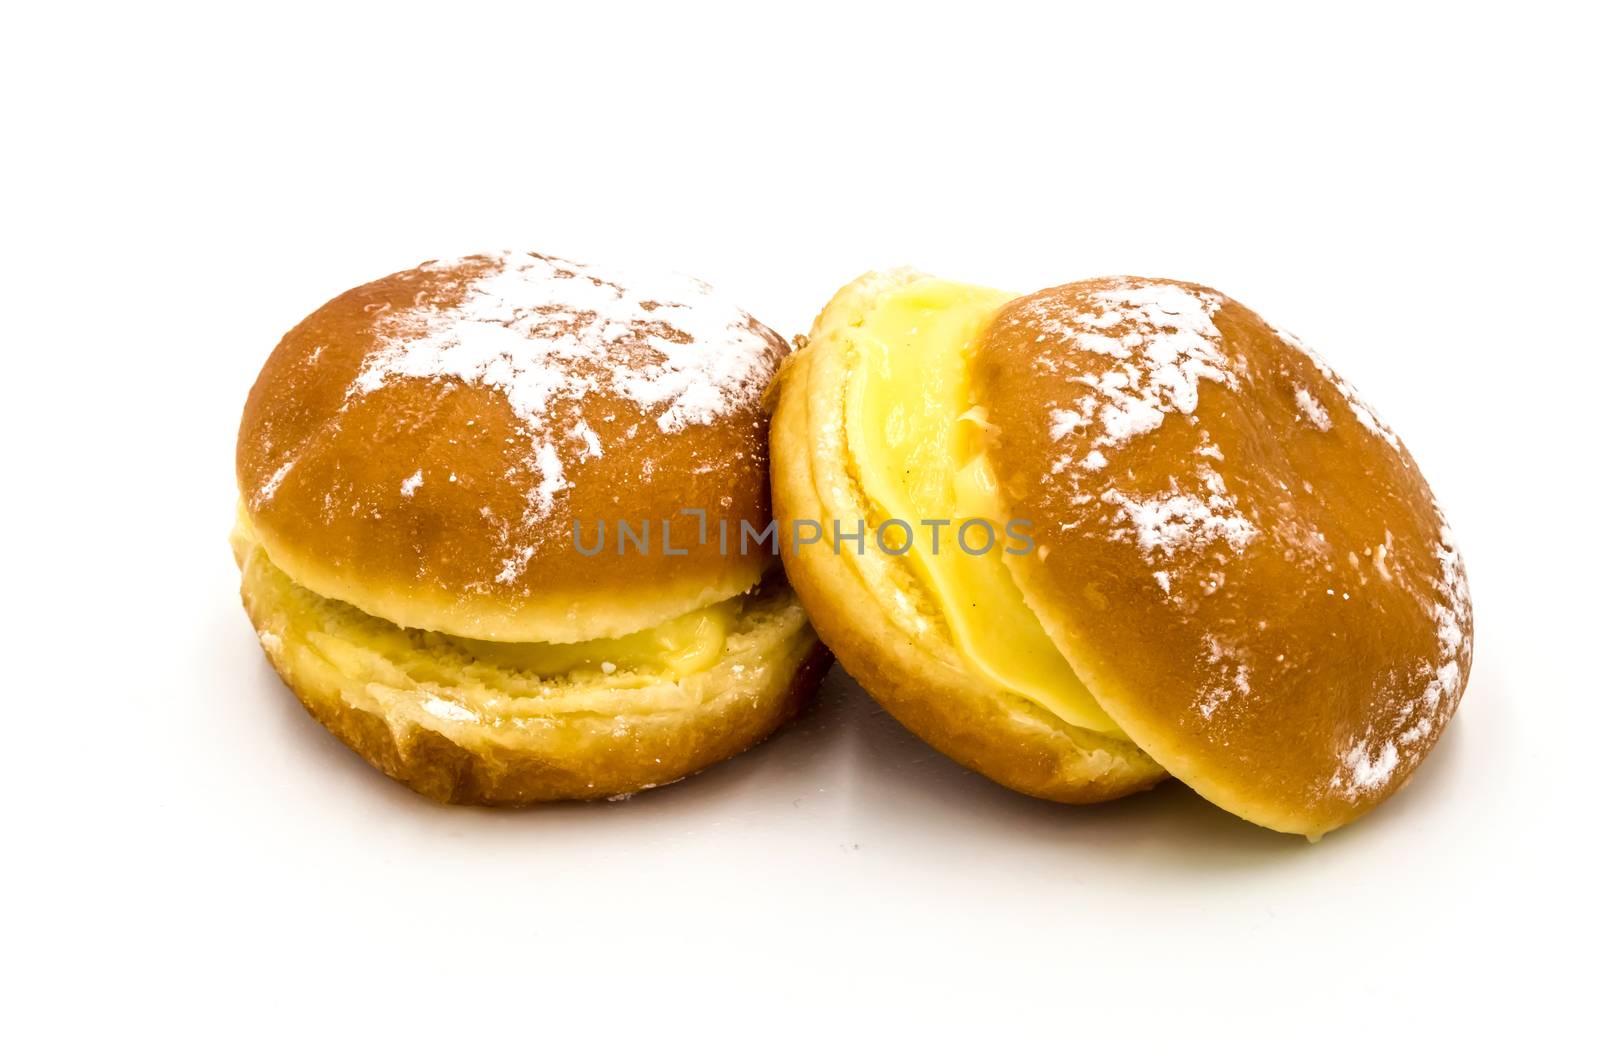 Bola de Berlim, or Berlim Ball, a Portuguese pastry made from a fried donut filled with sweet eggy cream and rolled in crunchy sugar on a white background.